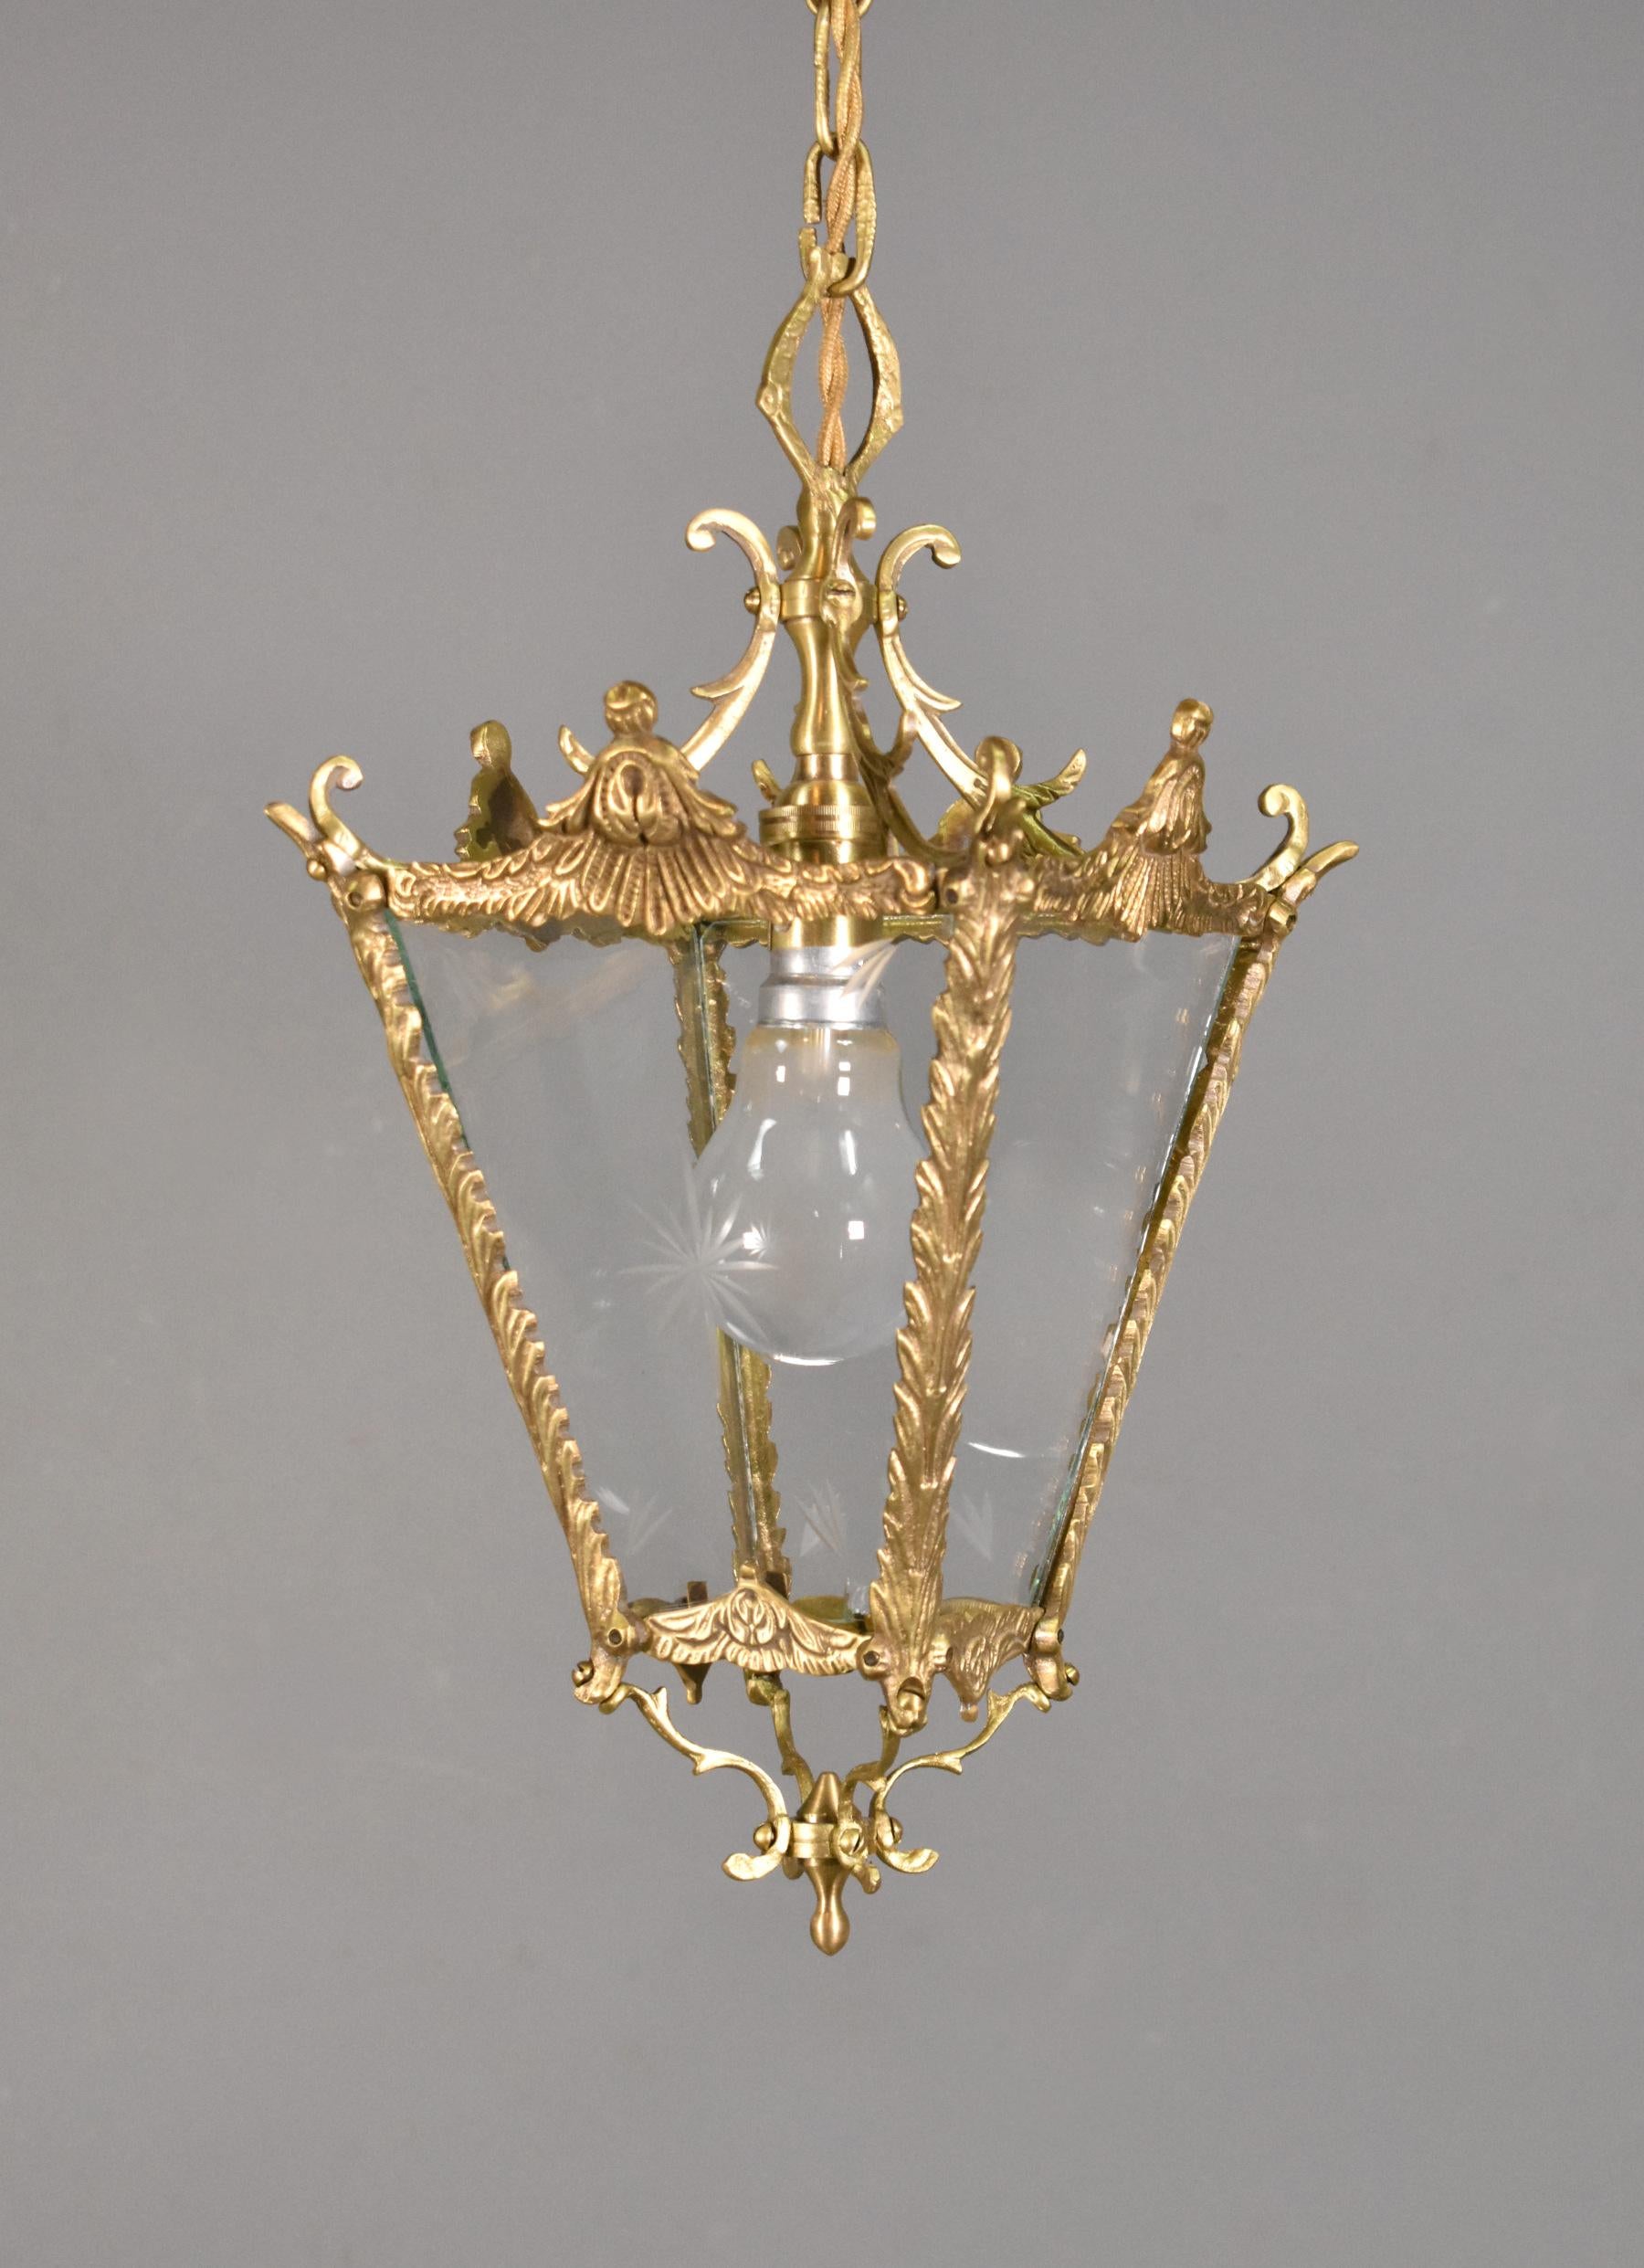 Cast Antique French Brass Lantern Louis XVI Style For Sale